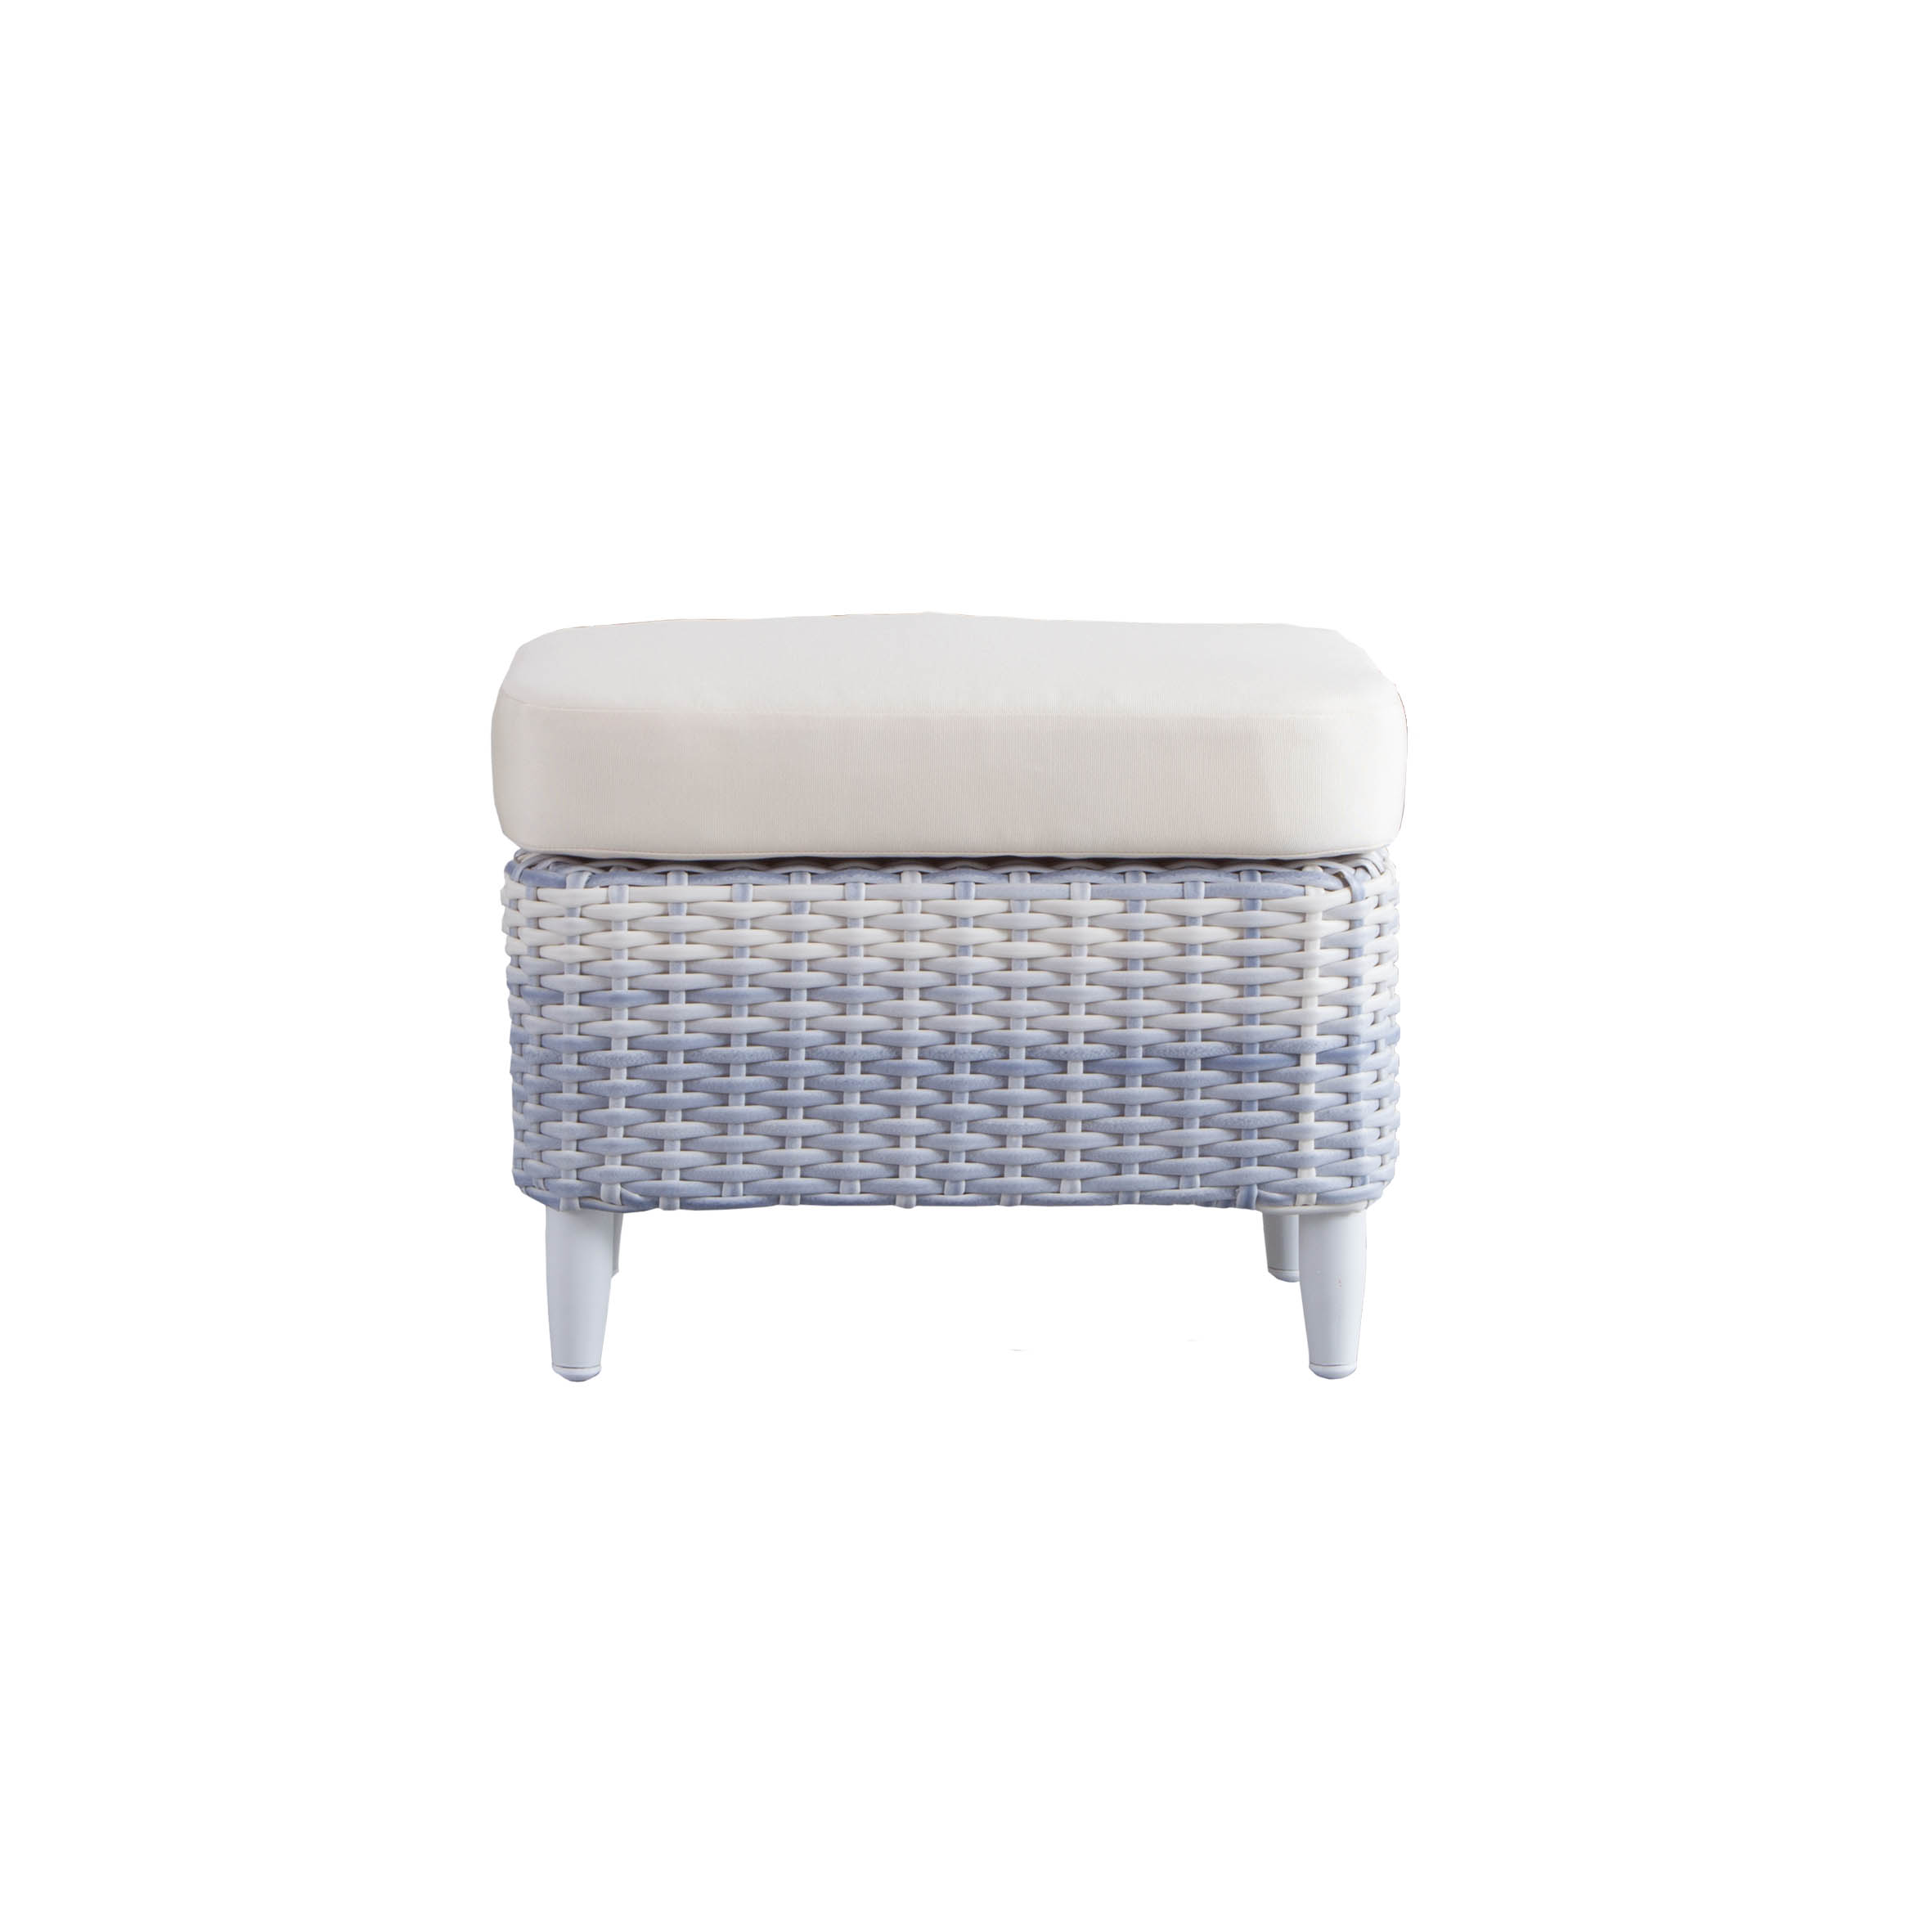 Butterfly sufra footstool S2